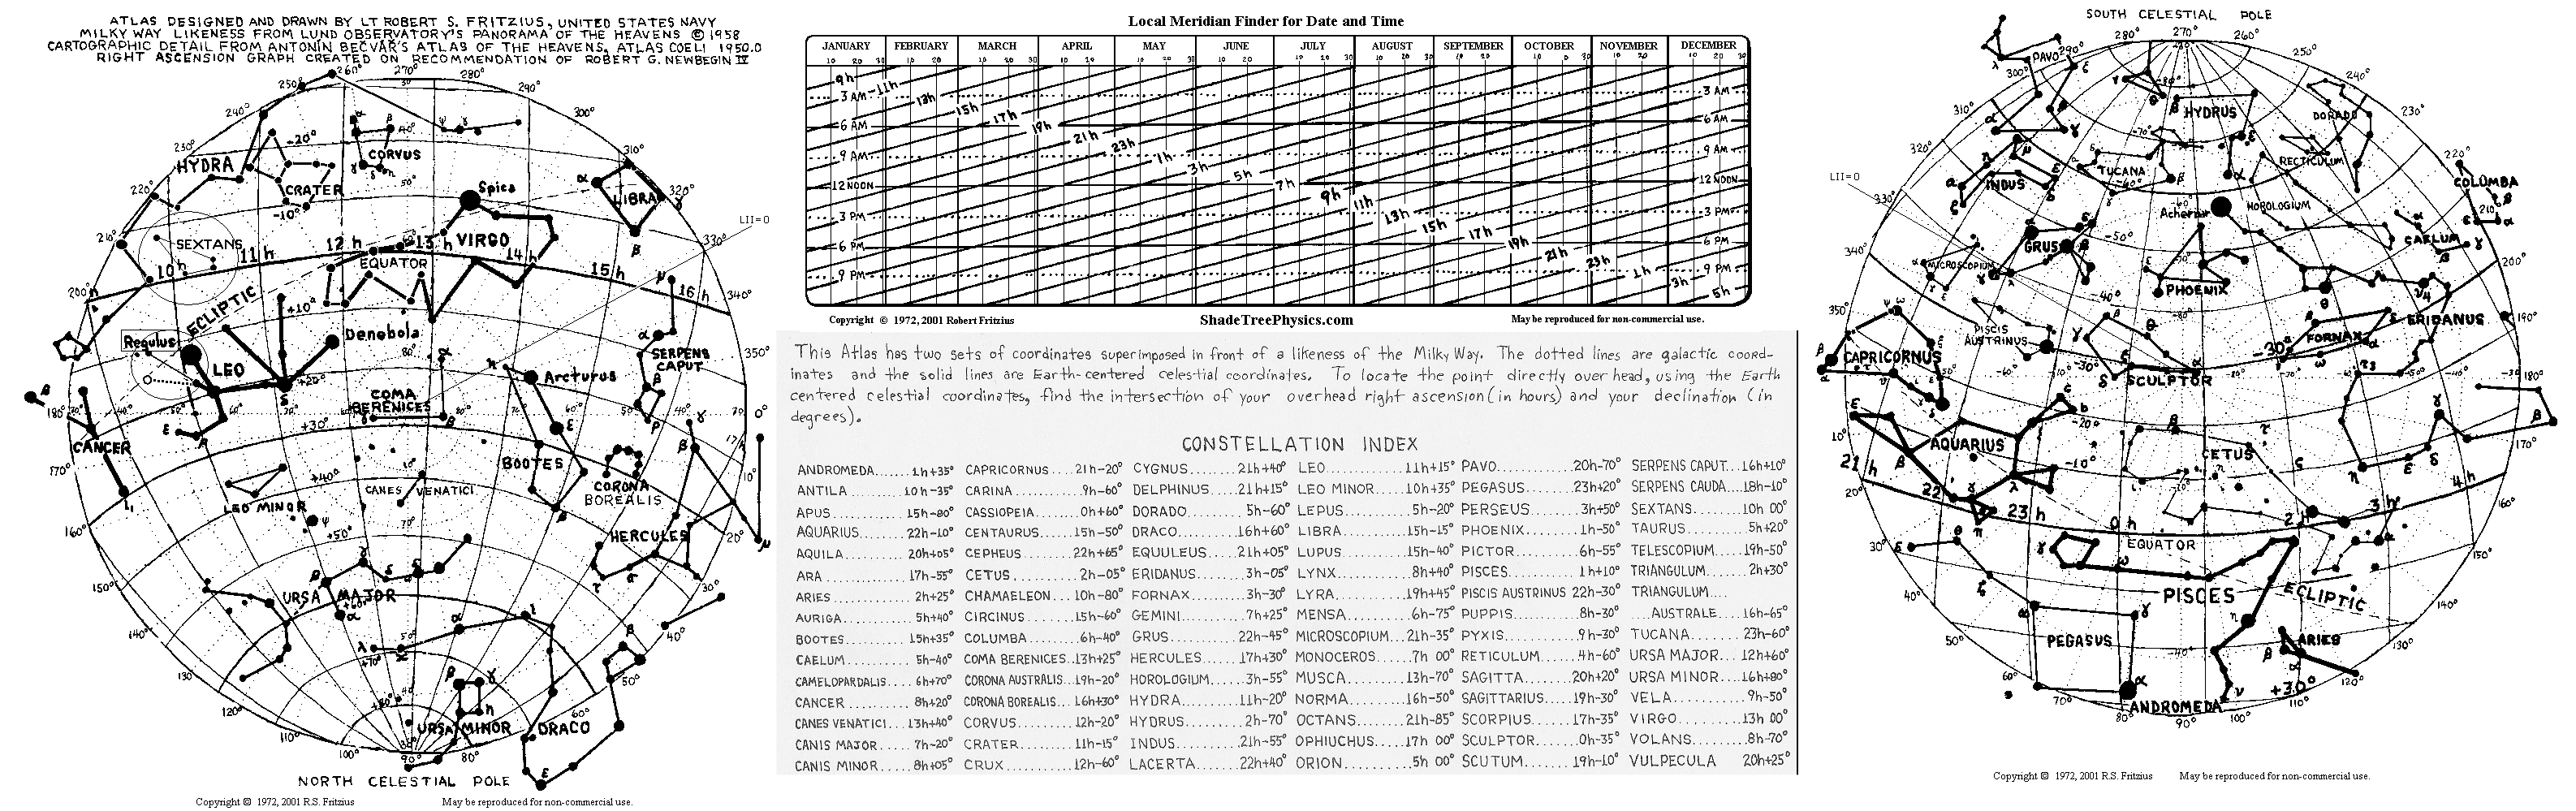 Polar Plots, Constellations Index, and Zenith Lookup